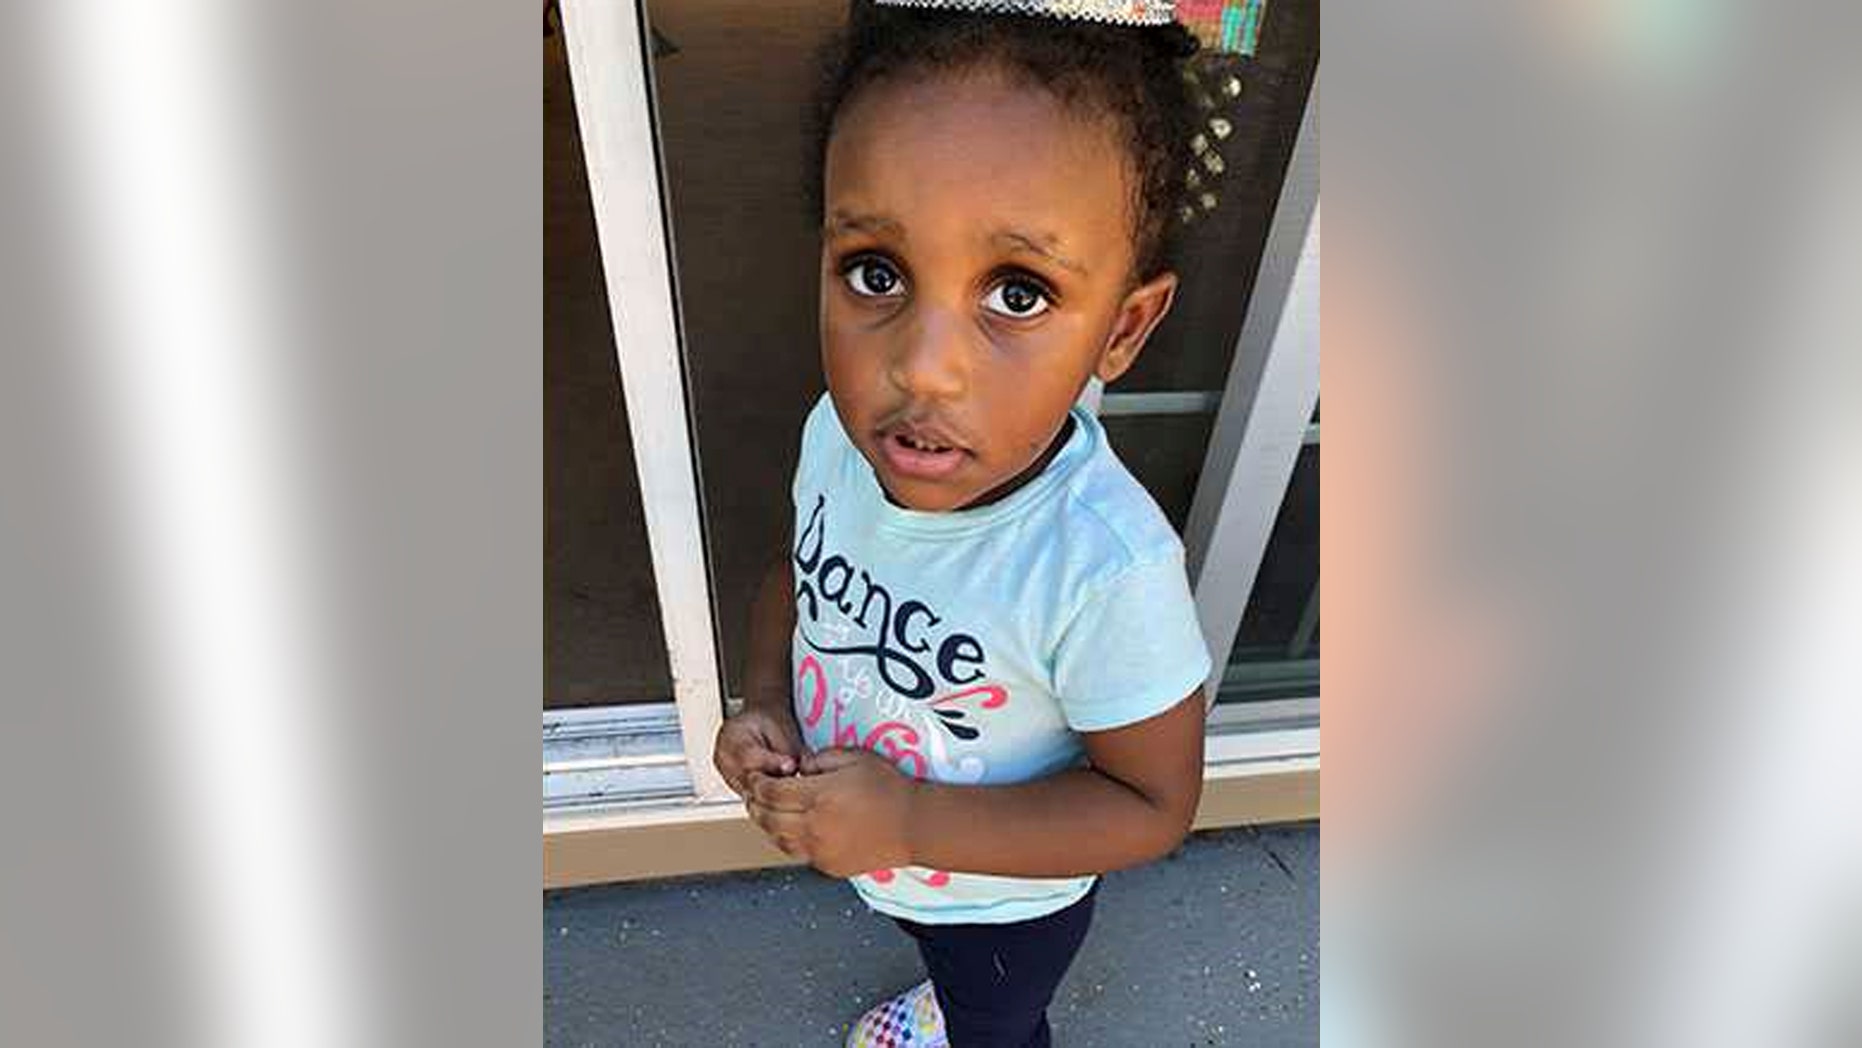 Body Of Missing 2 Year Old Girl Found Wrapped In Blanket Alongside 4470